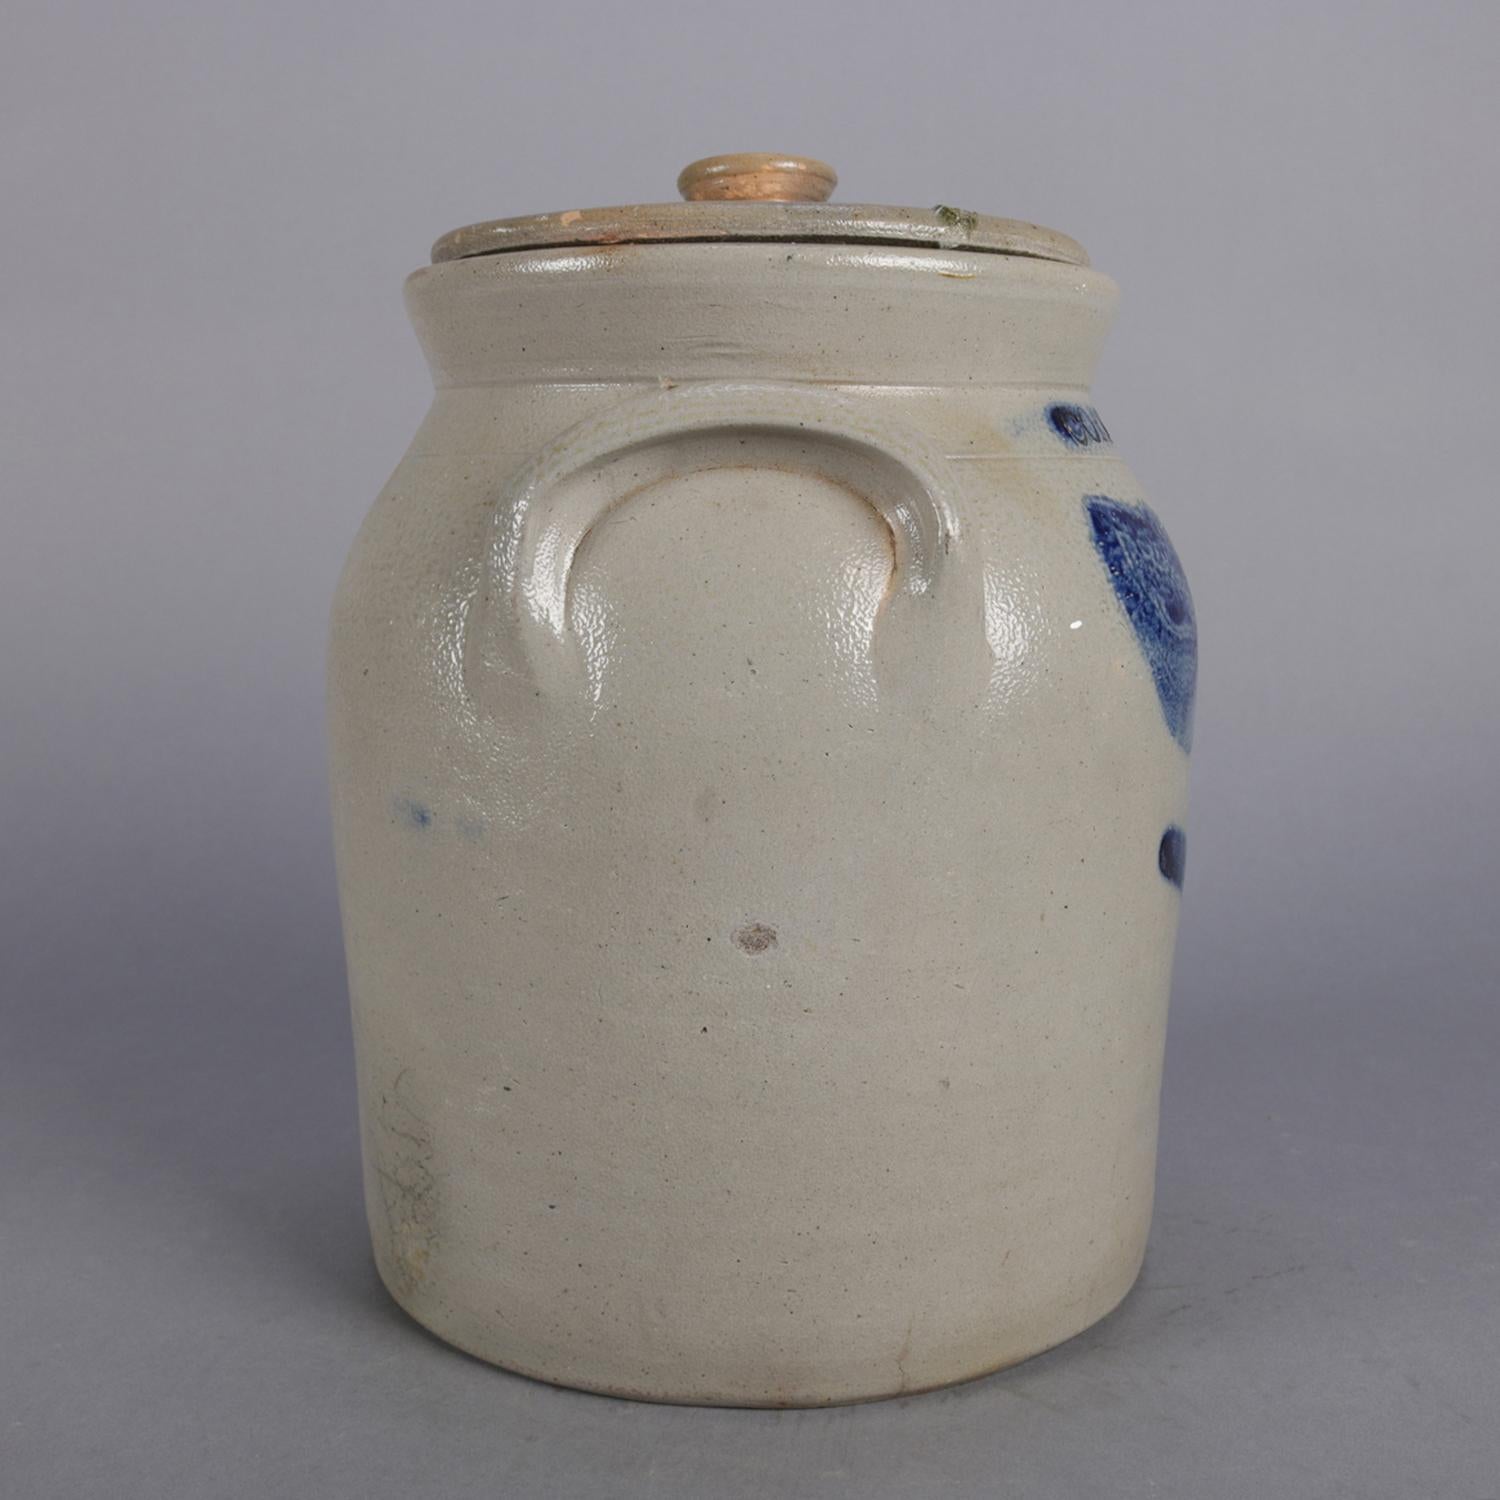 American Antique Cortland, New York Blue Decorated & Covered Stoneware Jar